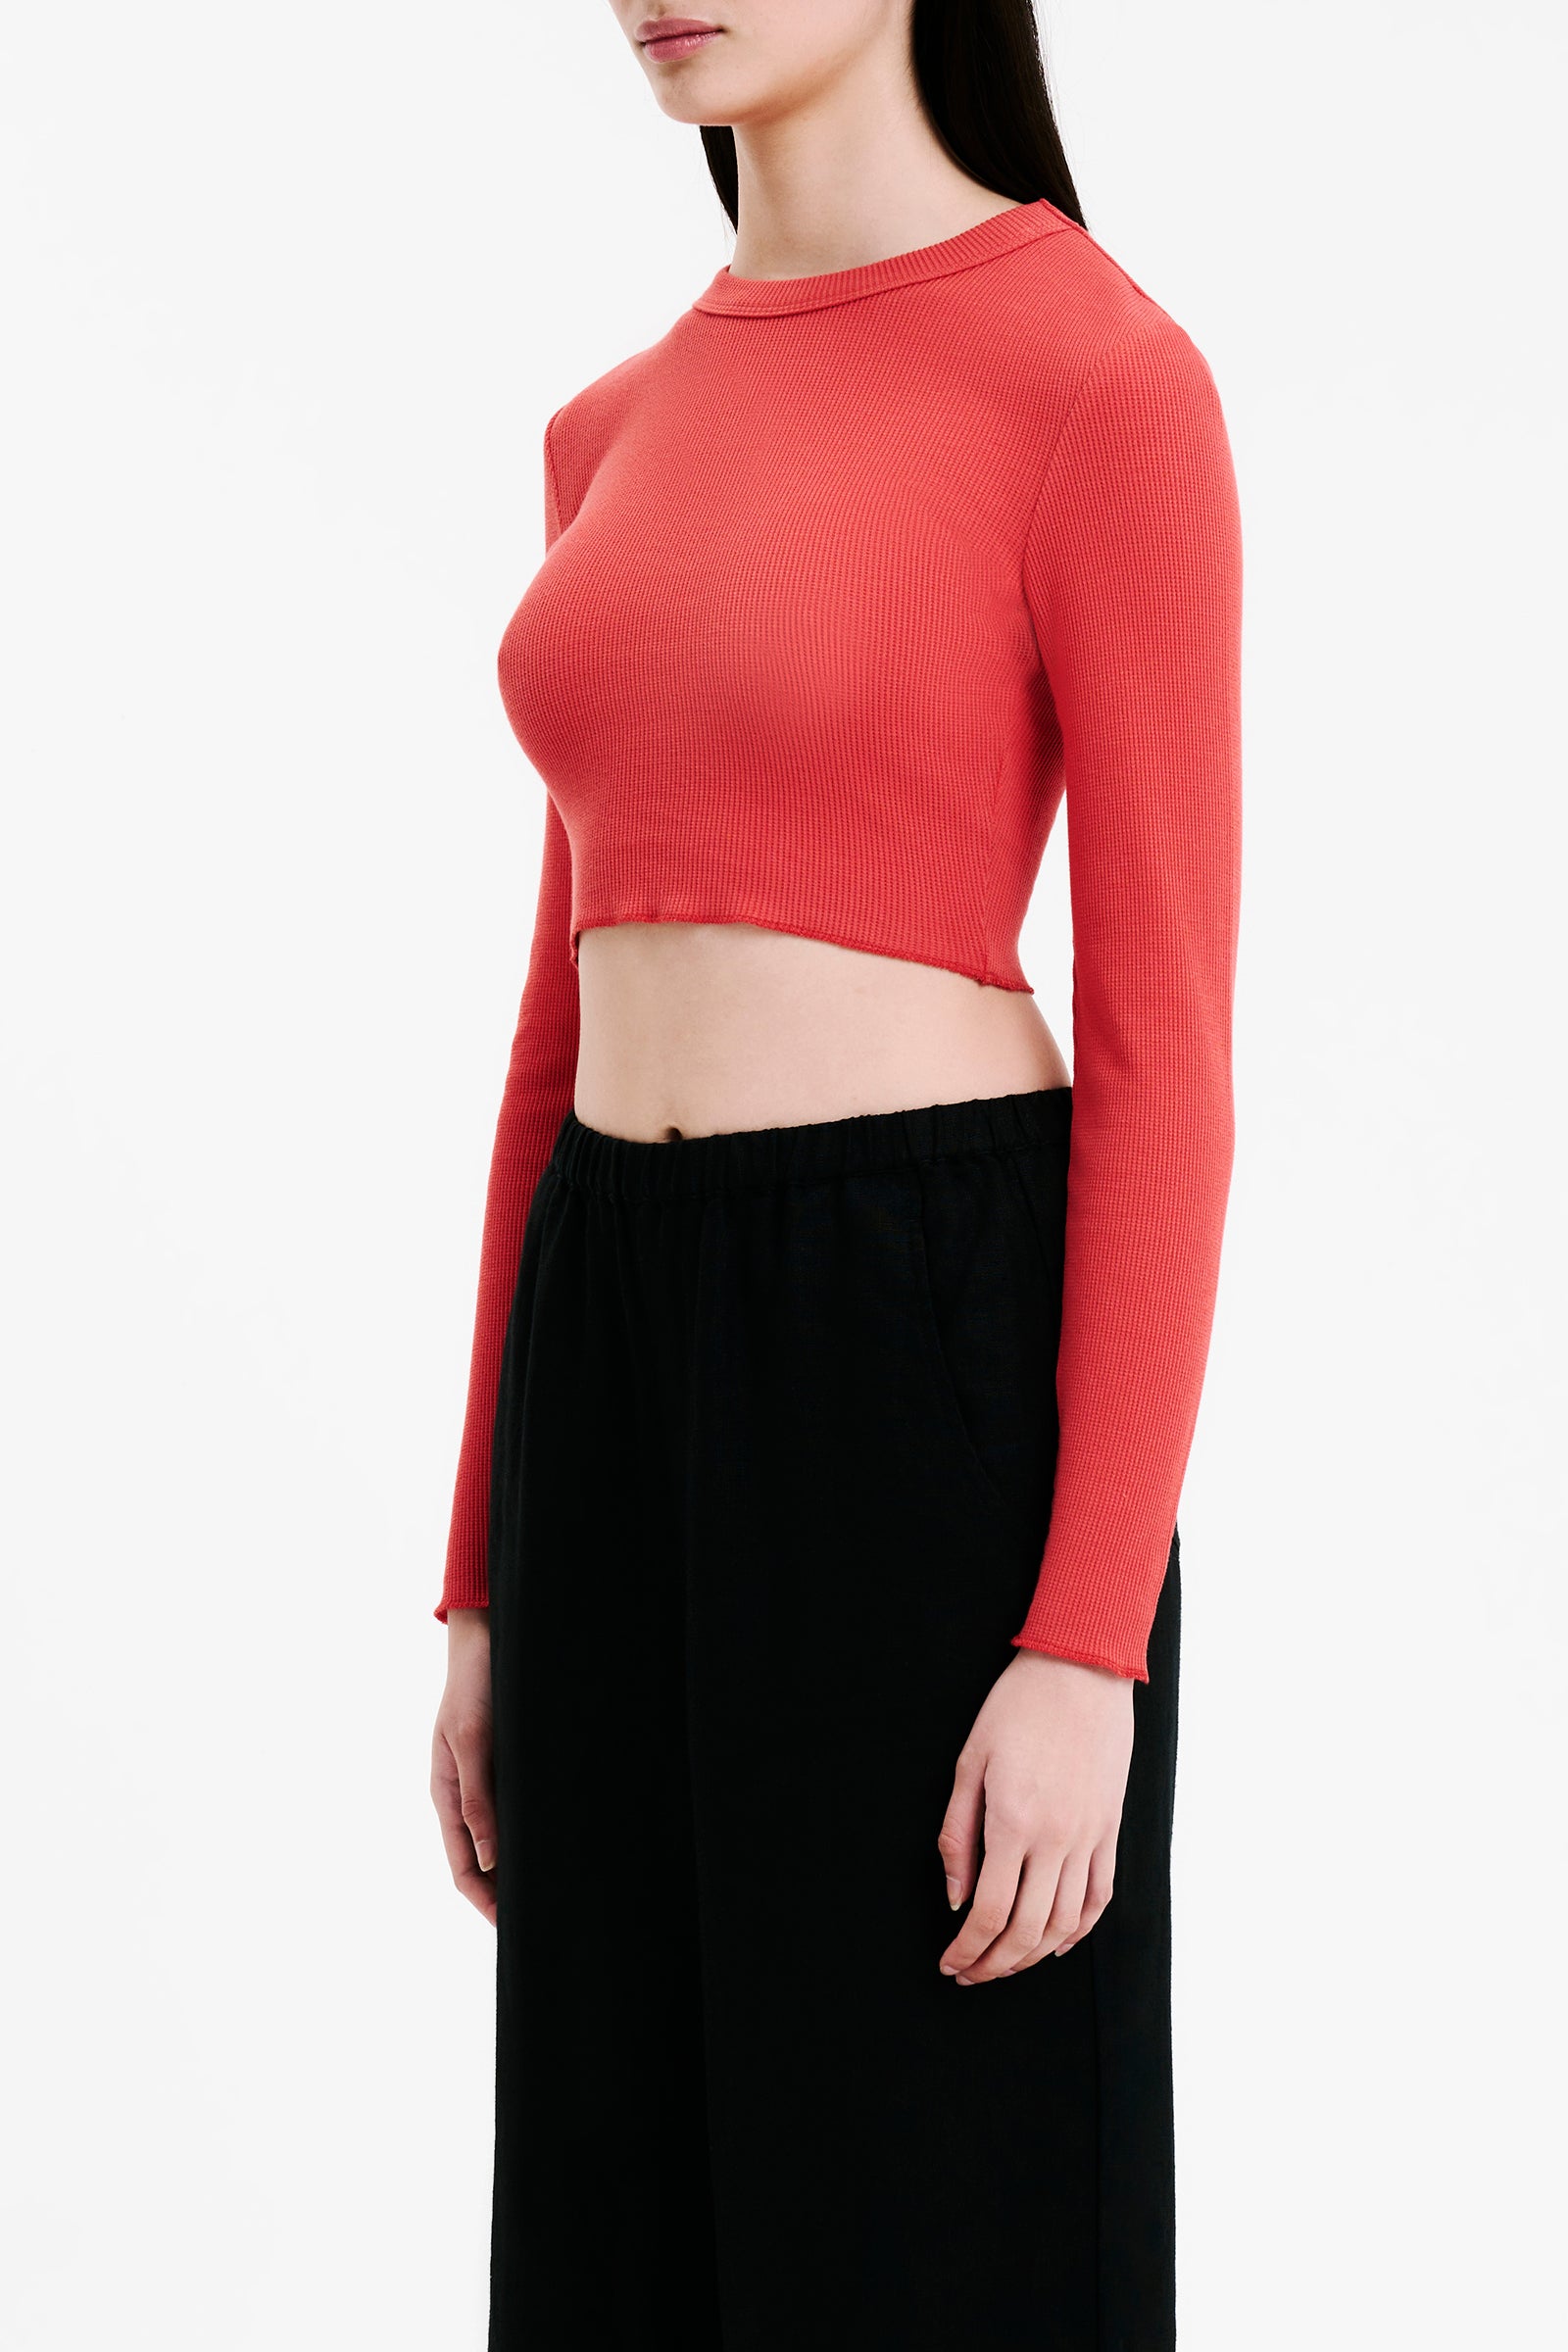 Nude Lucy Essential Long Sleeve Waffle Tee in a Pink & Orange Toned Coral Colour